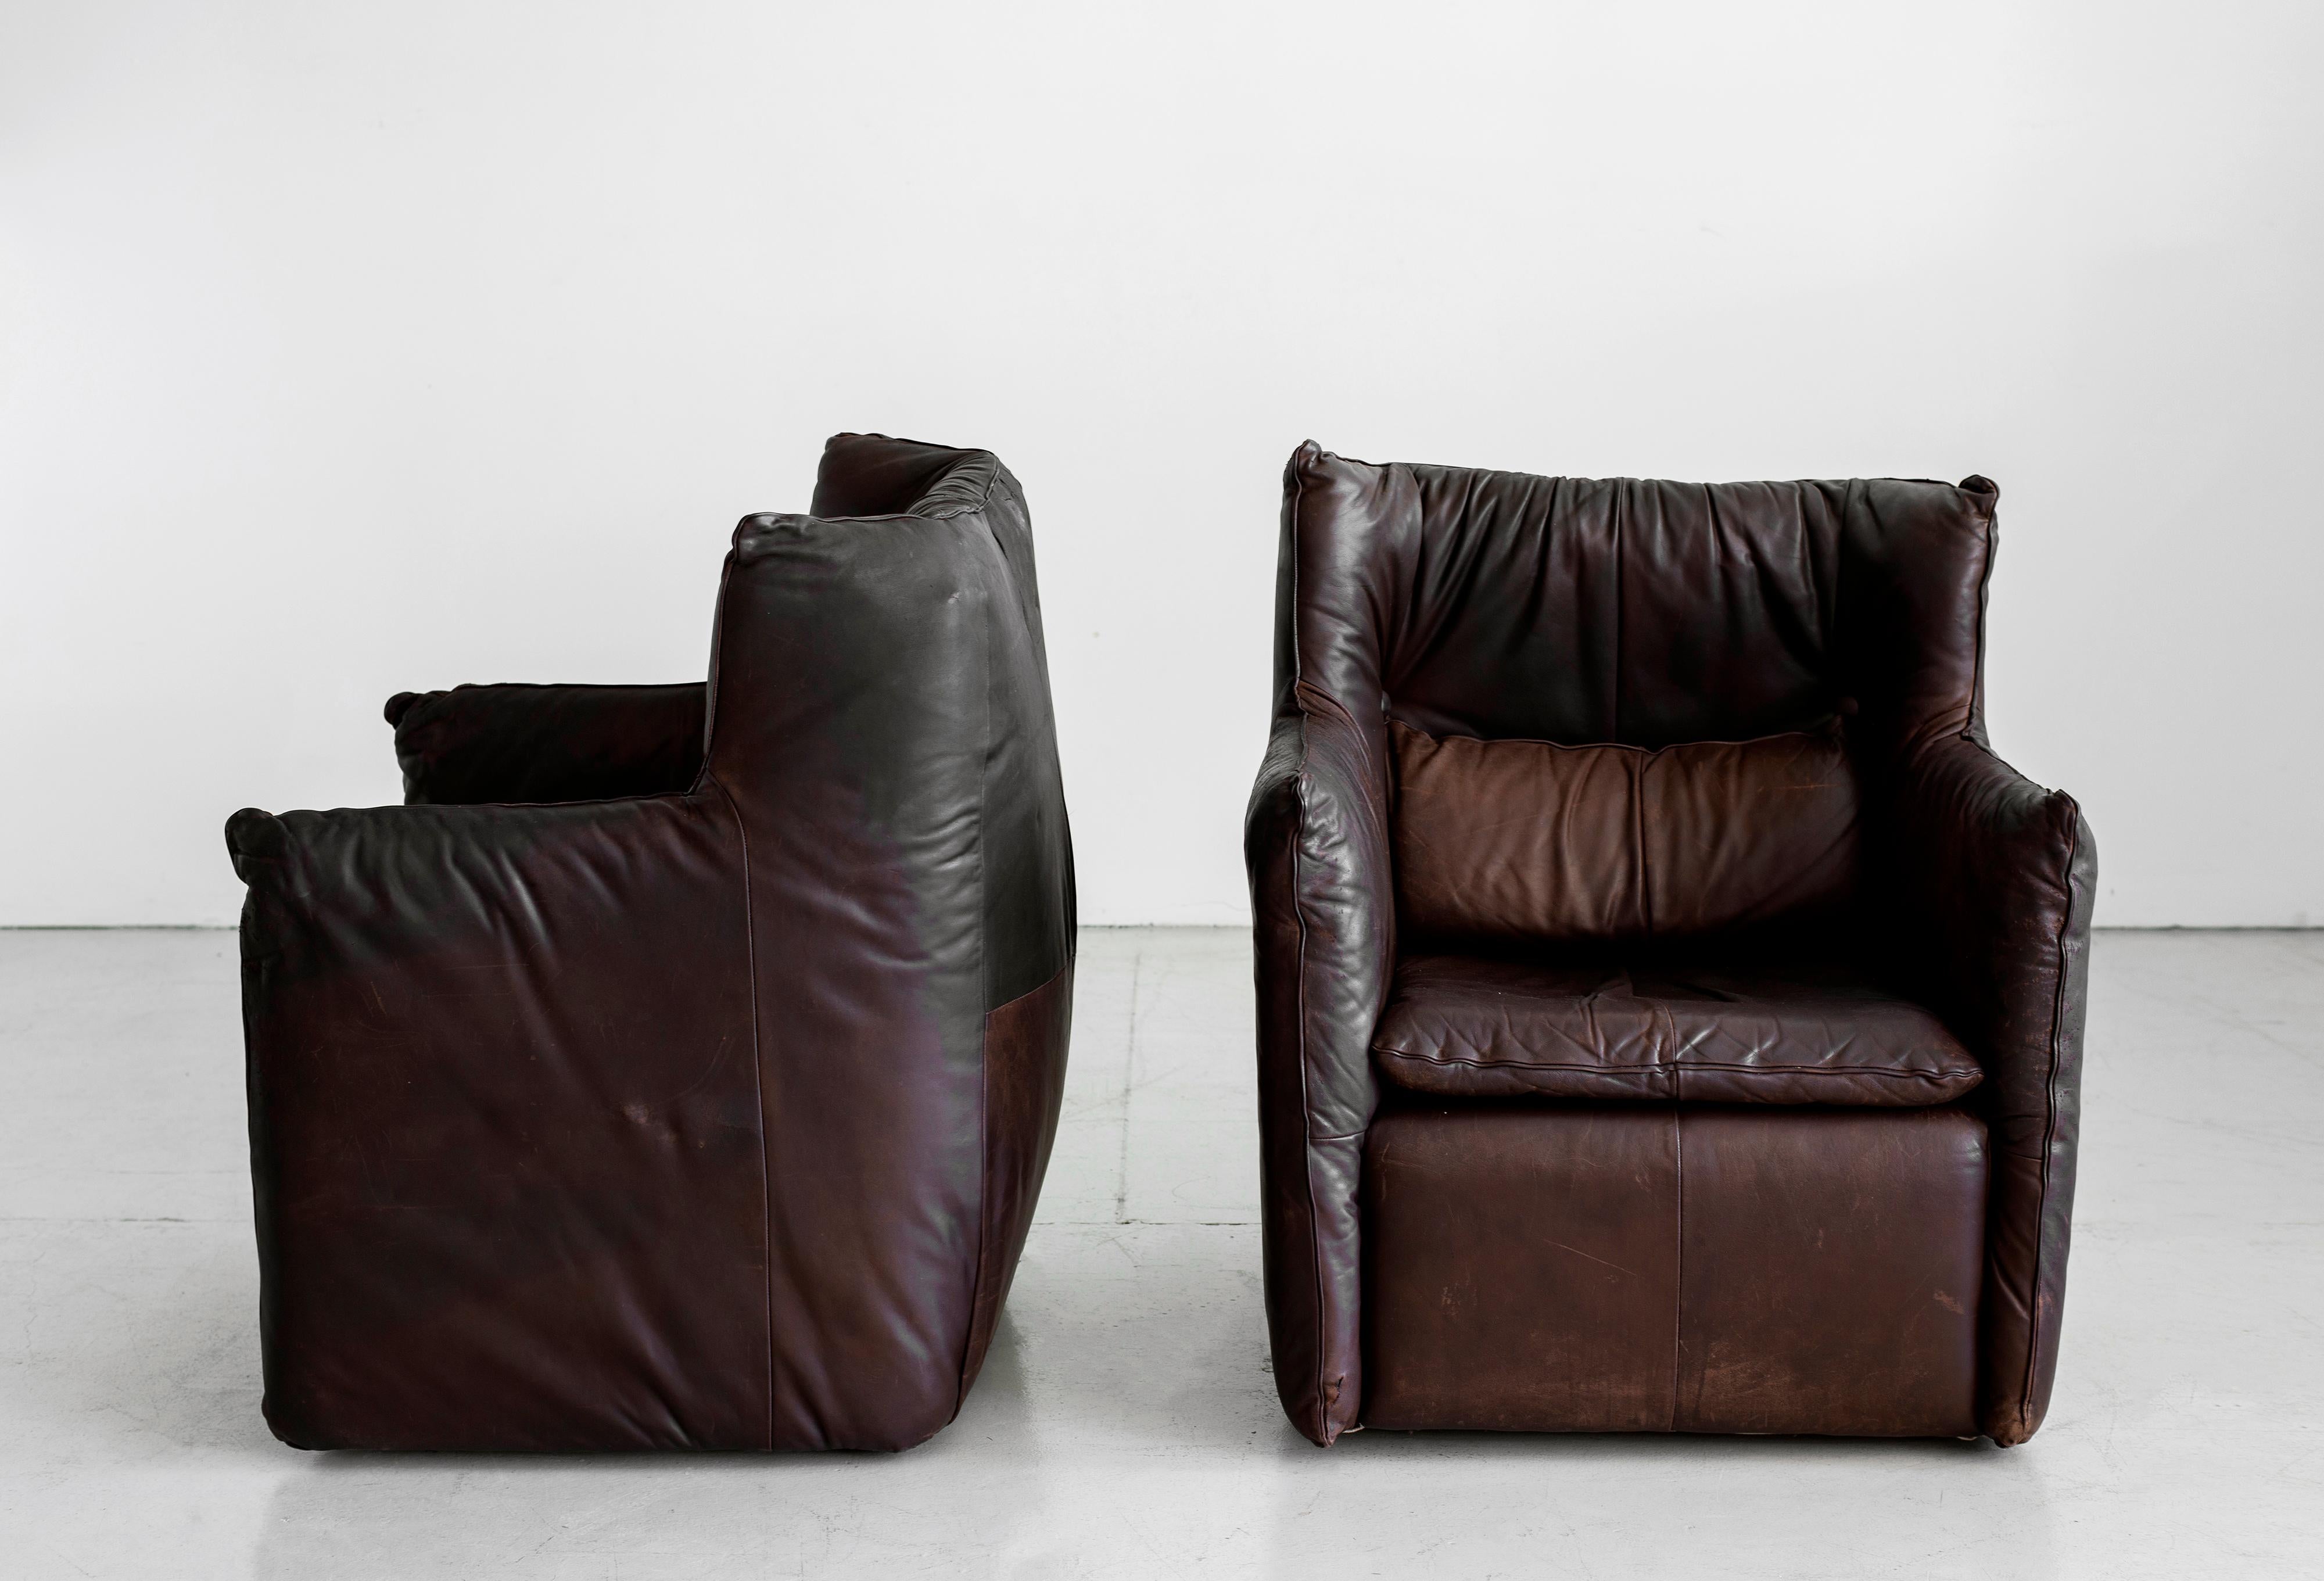 Great pair of leather lounge chairs by Gerard Van Den Berg. Original chocolate brown leather upholstery. Removable lower lumbar pillow attached with button and loop detail. Supple leather has beautiful age and patina with some small pinhole cracks.